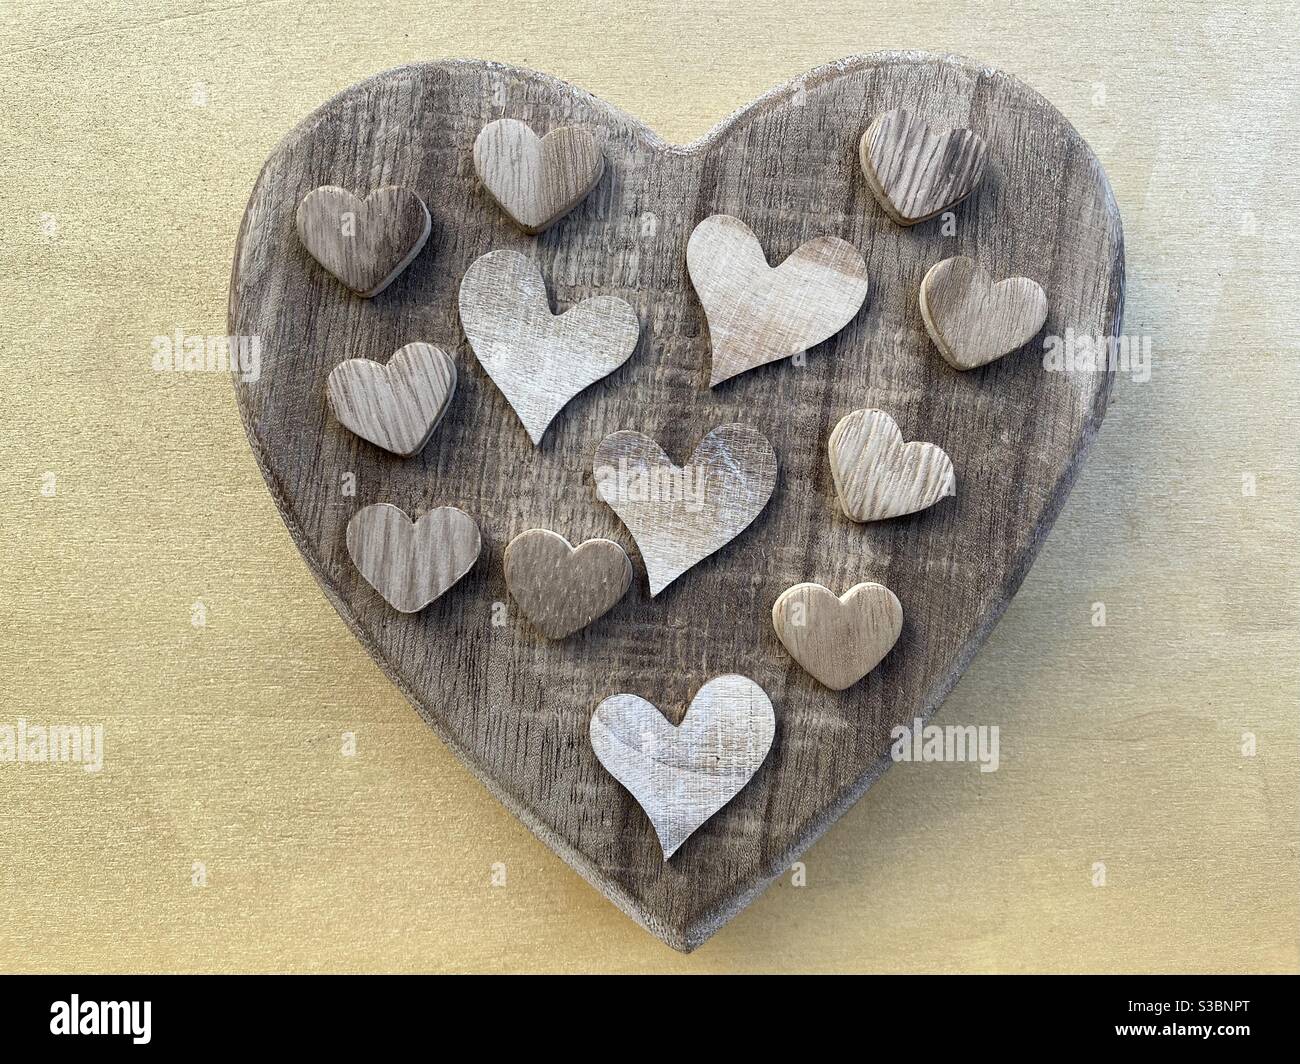 Love message with a big wooden heart and many little wooden hearts Stock Photo